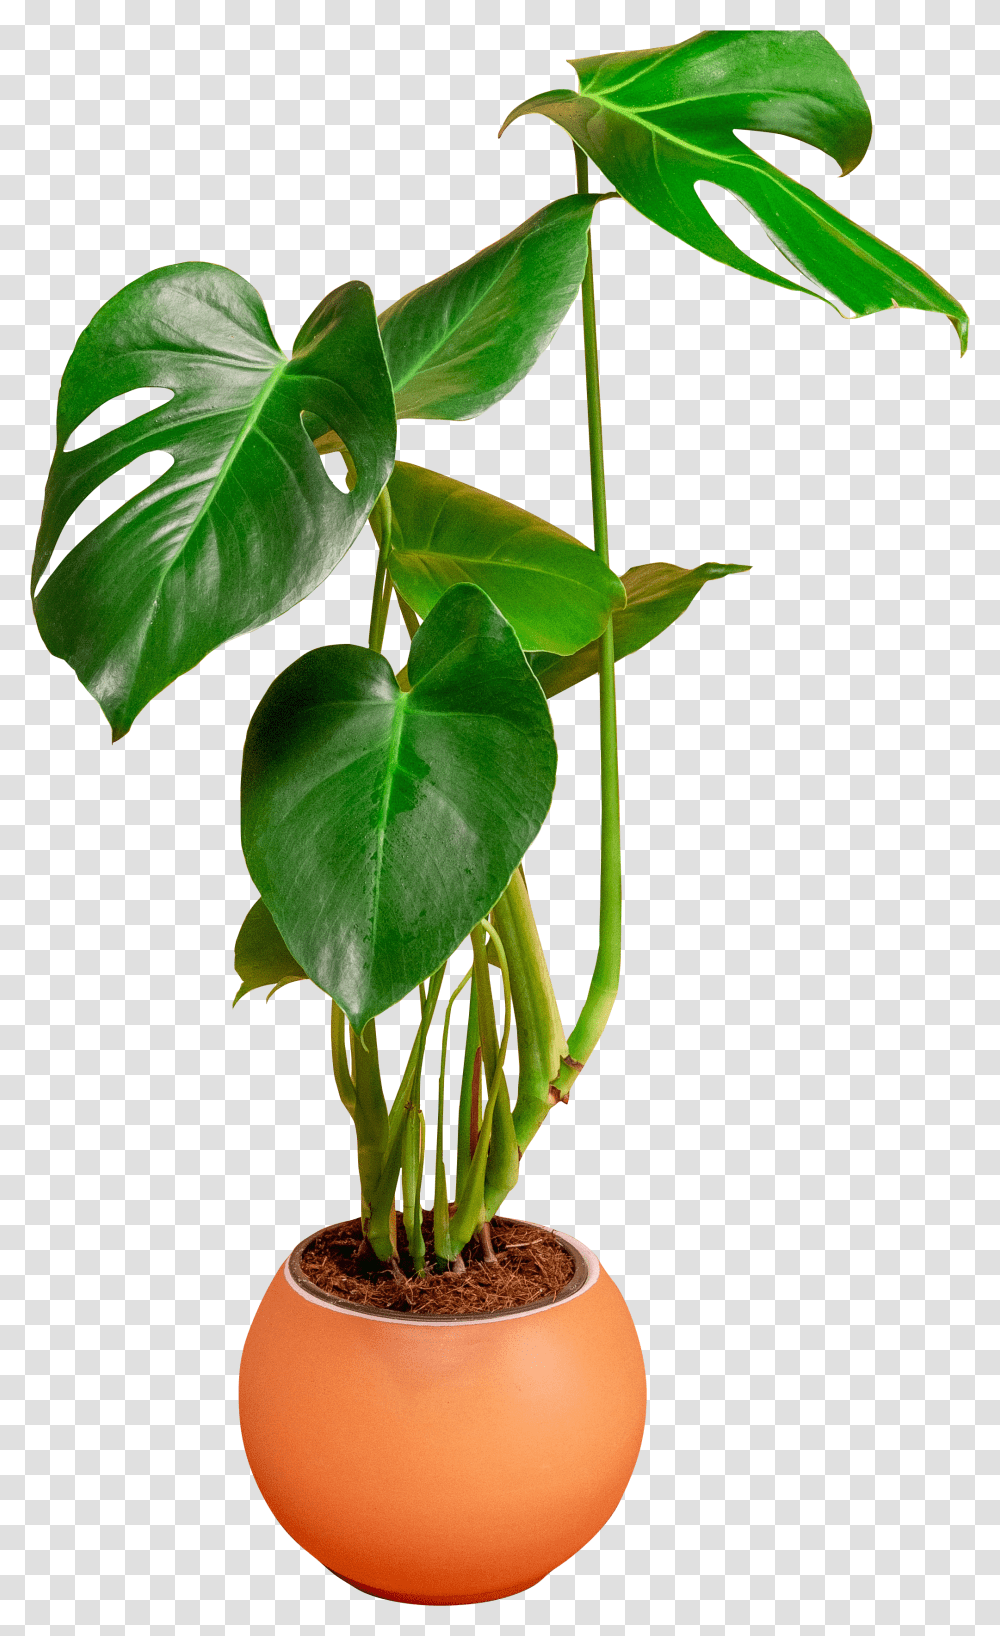 Flower In A Pot - For Free Cheese Plant Hd Transparent Png